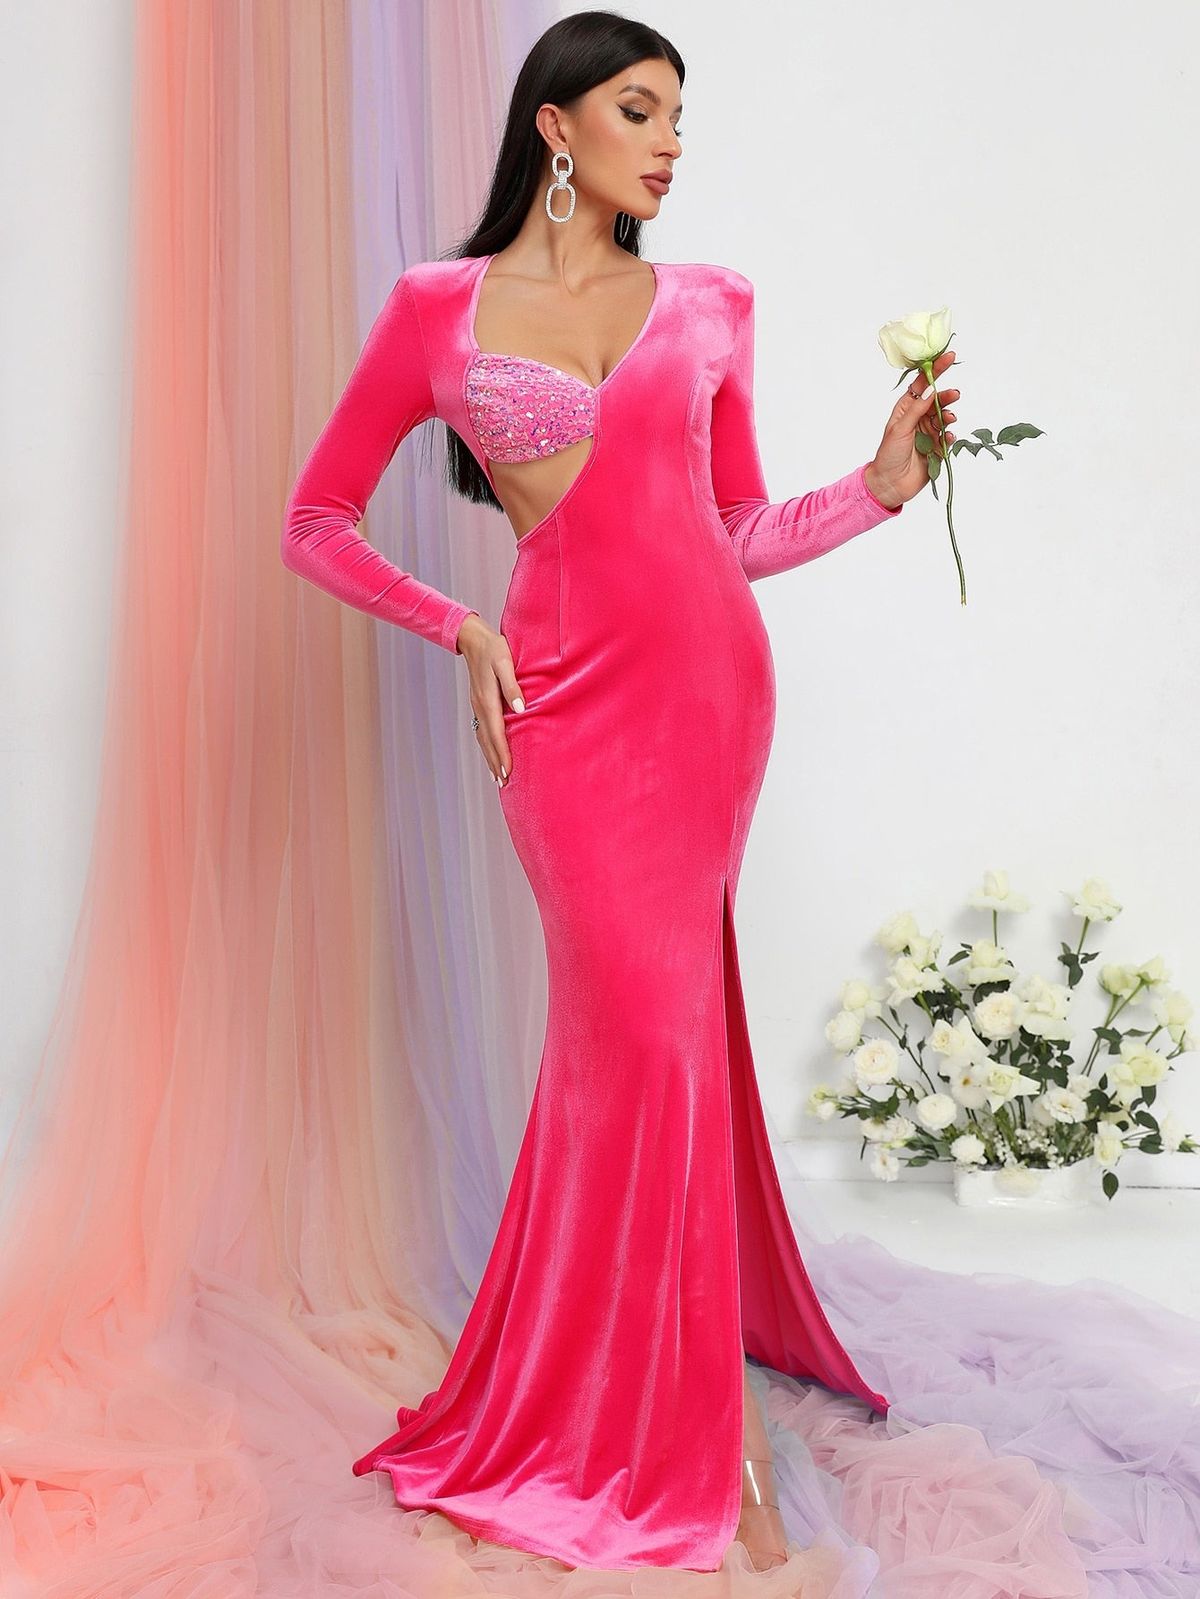 Caroline Luxury Tulle Pink Evening Dress V Neck Three Quarter Sleeves  Glitter Sequin Backless Prom Gowns Party Custom Ma Color Black US Size 8